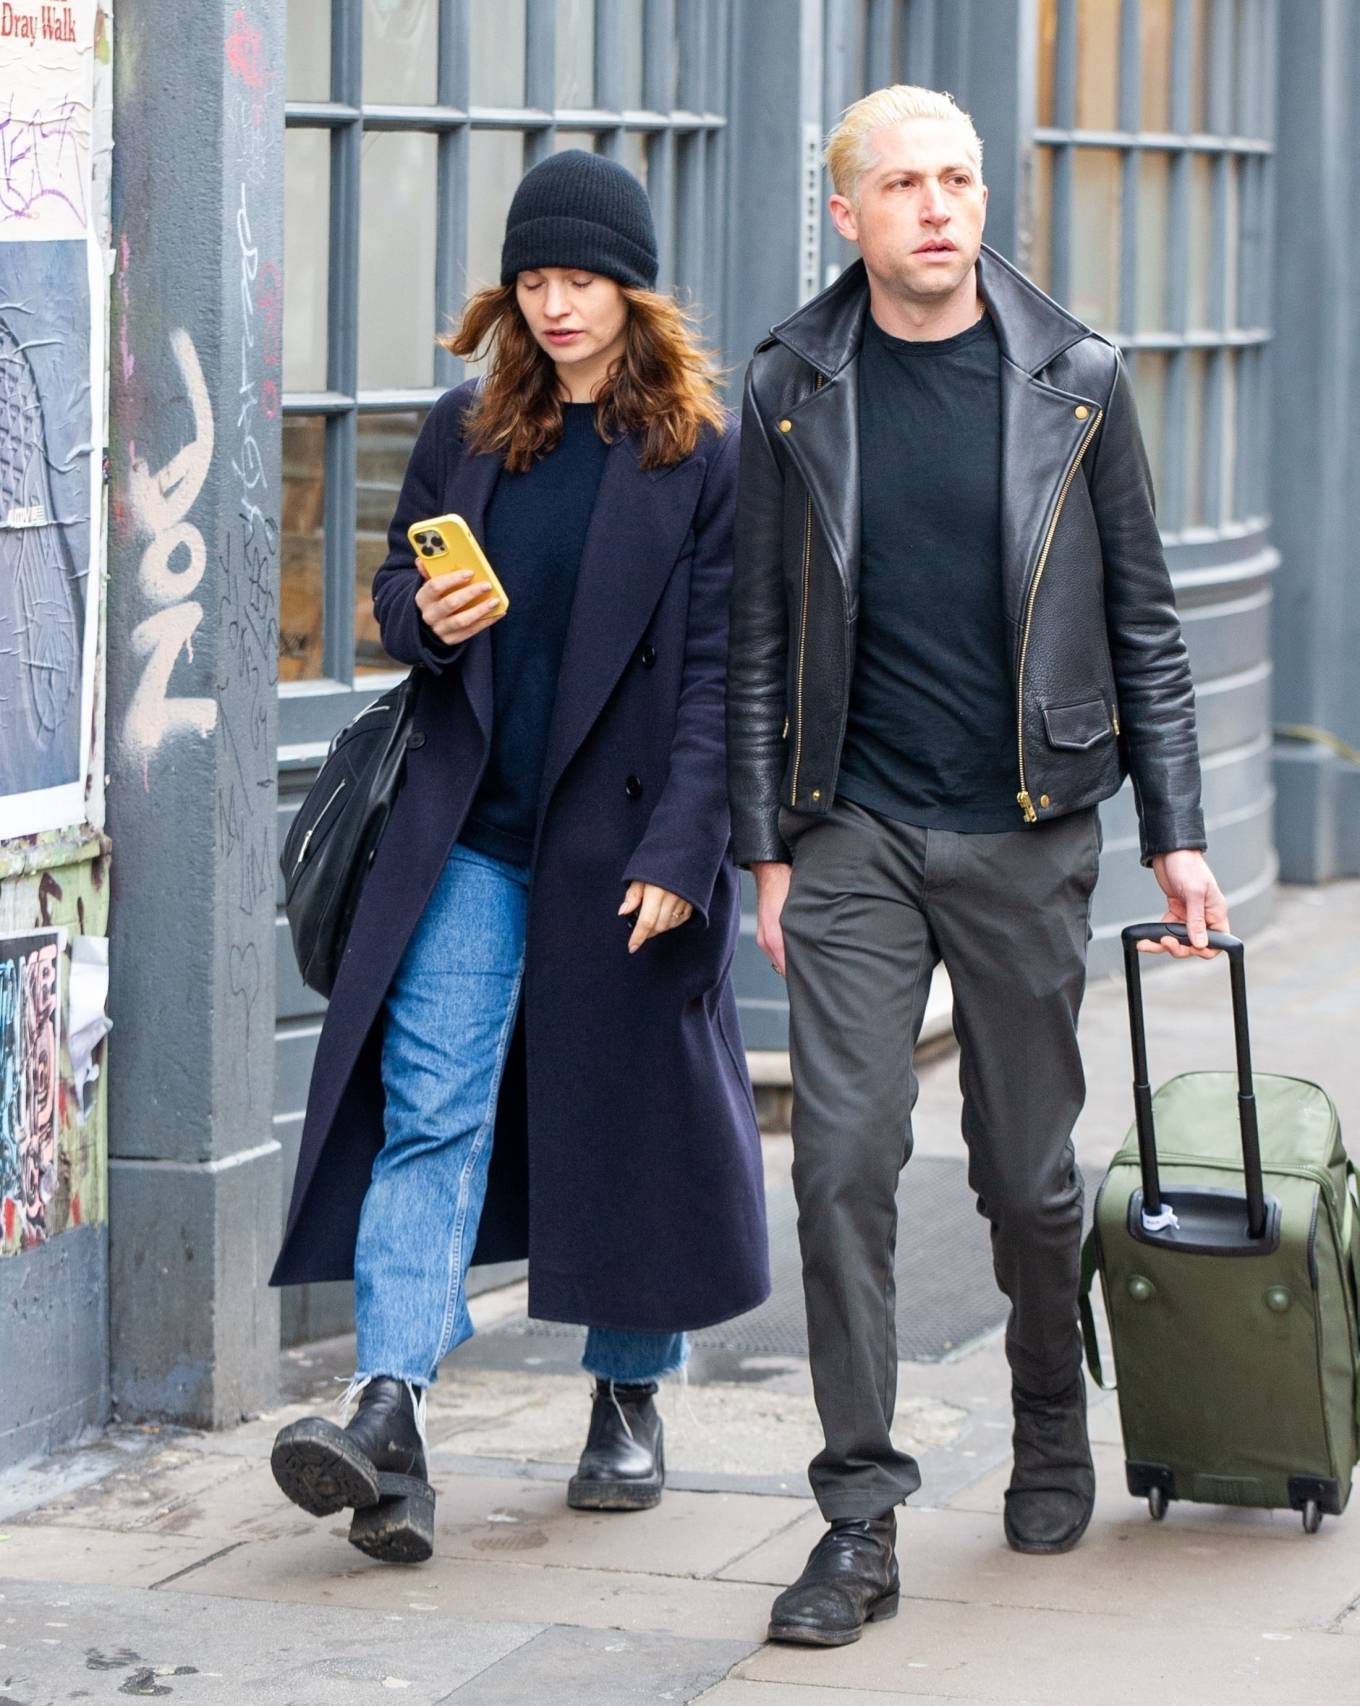 Lily James - Steps out with boyfriend Michael Shuman in Soho - London